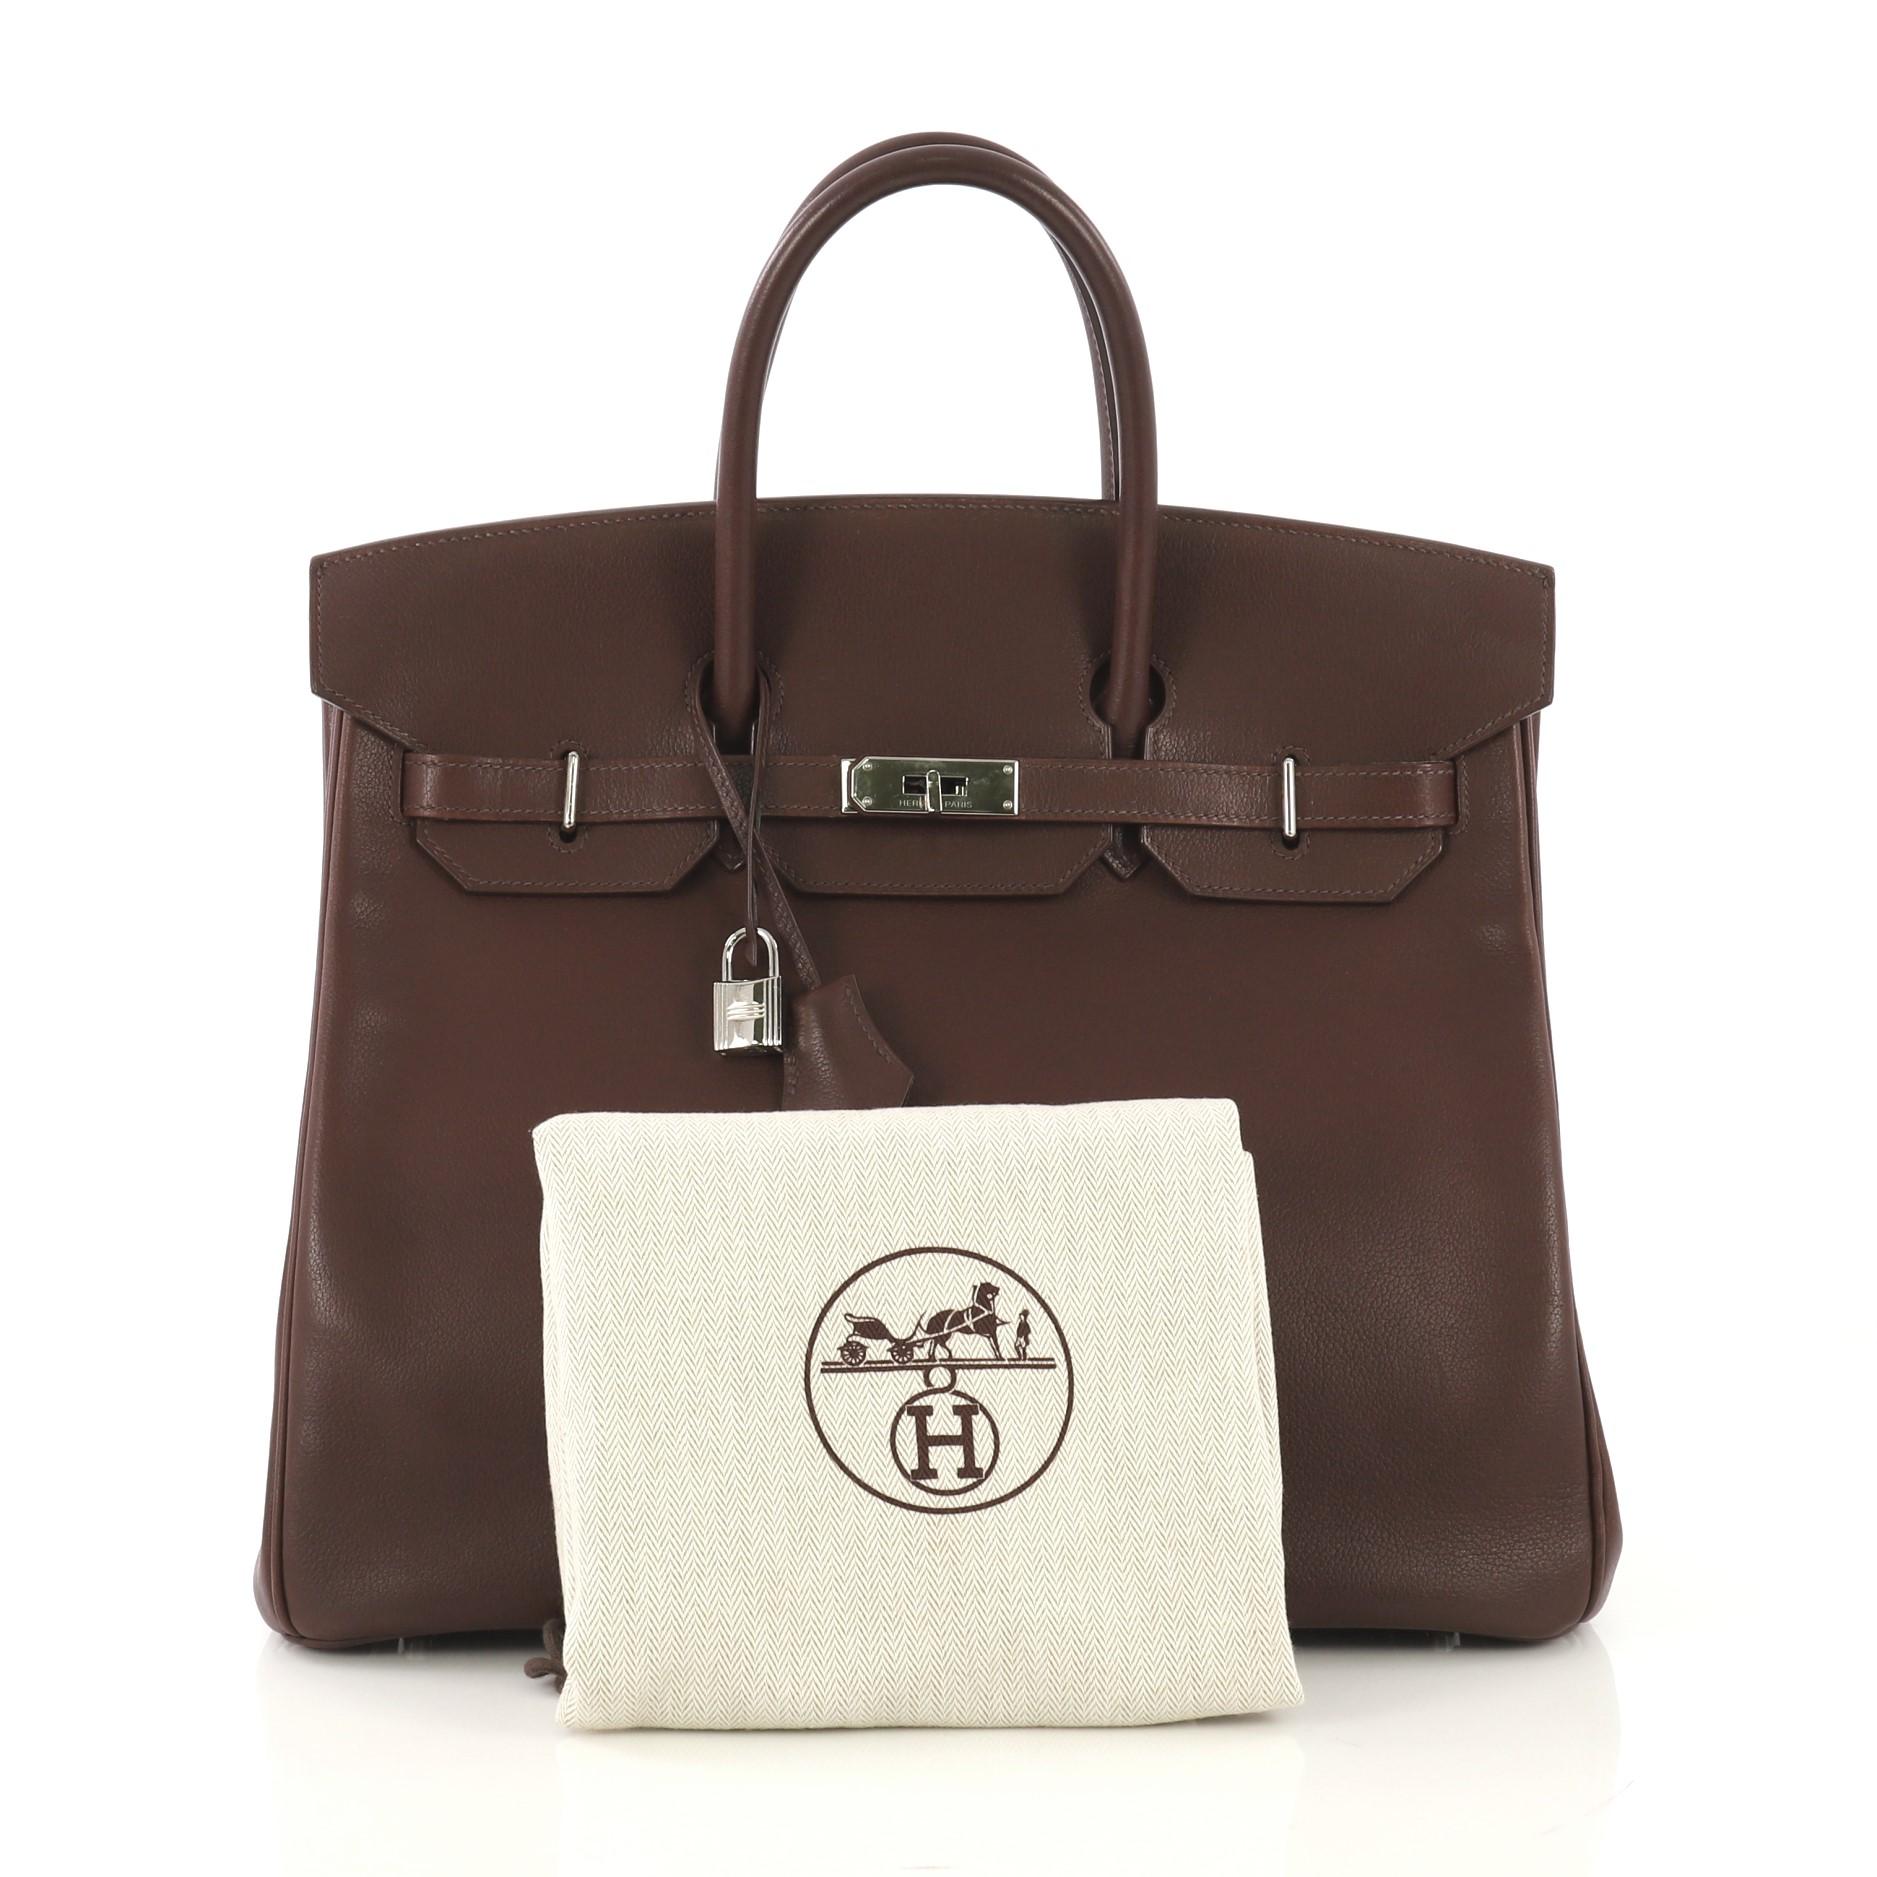 This Hermes HAC Birkin Bag Havane Evergrain with Palladium Hardware 36, crafted in Havane brown Evergrain leather, features dual rolled handles, front flap, and palladium hardware. Its turn-lock closure opens to a Havane brown Chevre leather